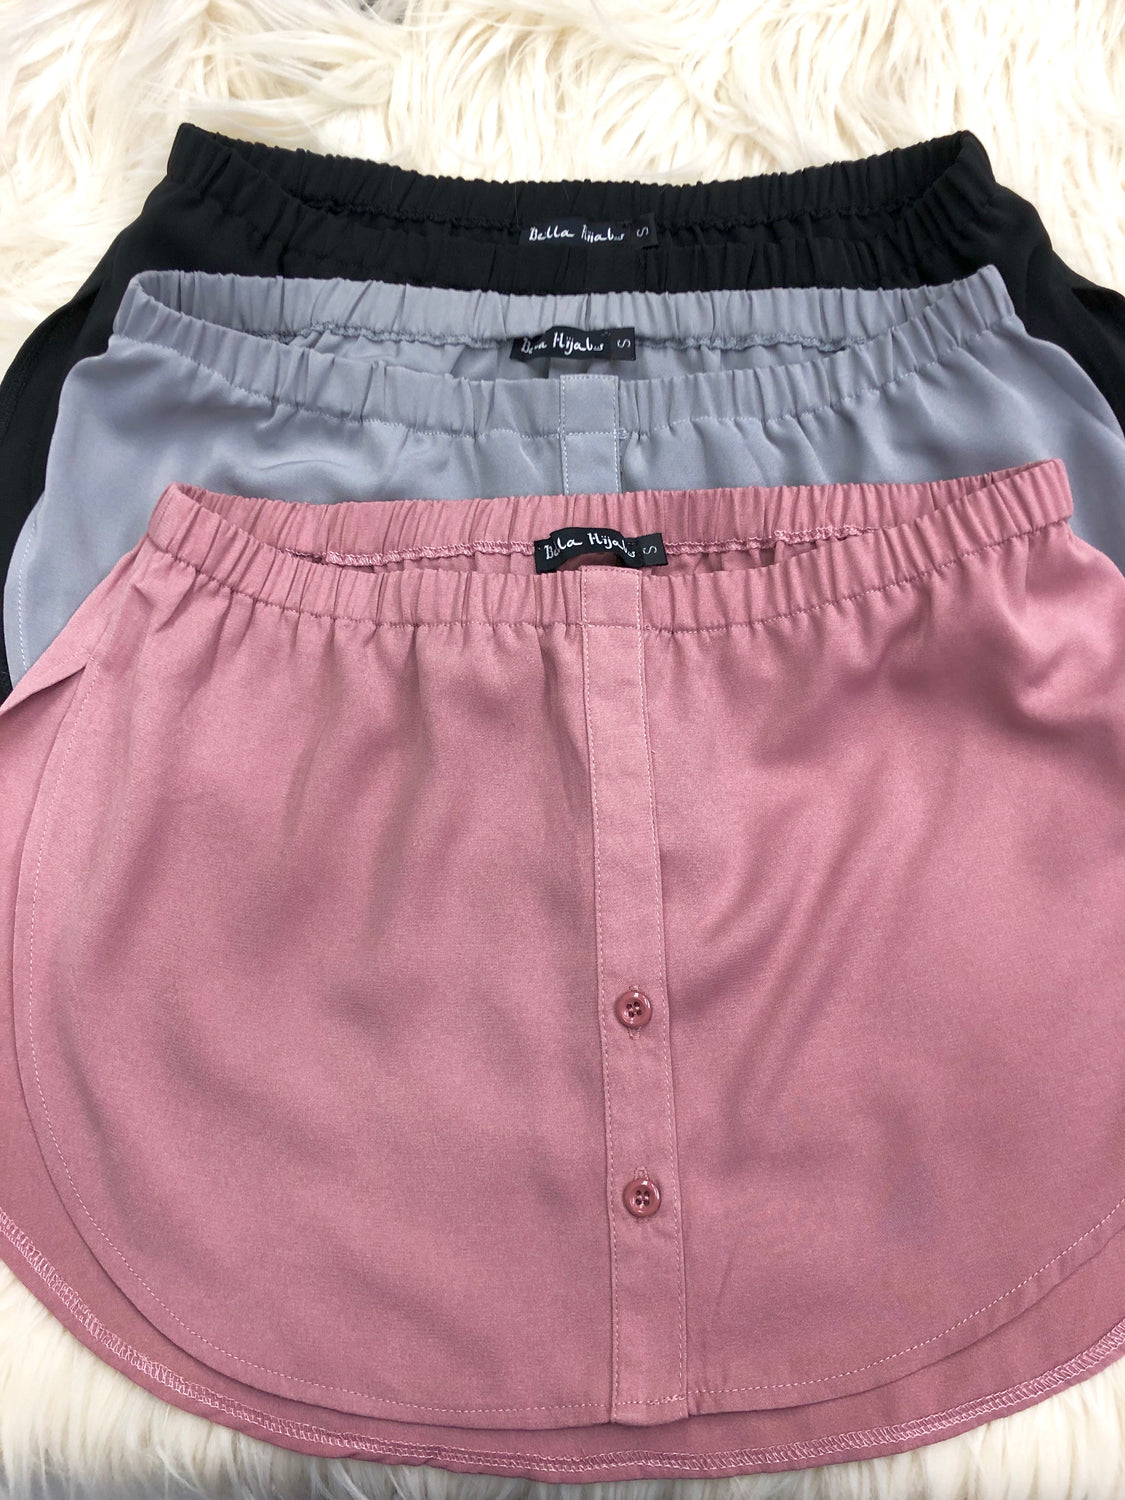 bundle of fake shirt extenders in black, gray, and mauve with buttons and an elastic waistband